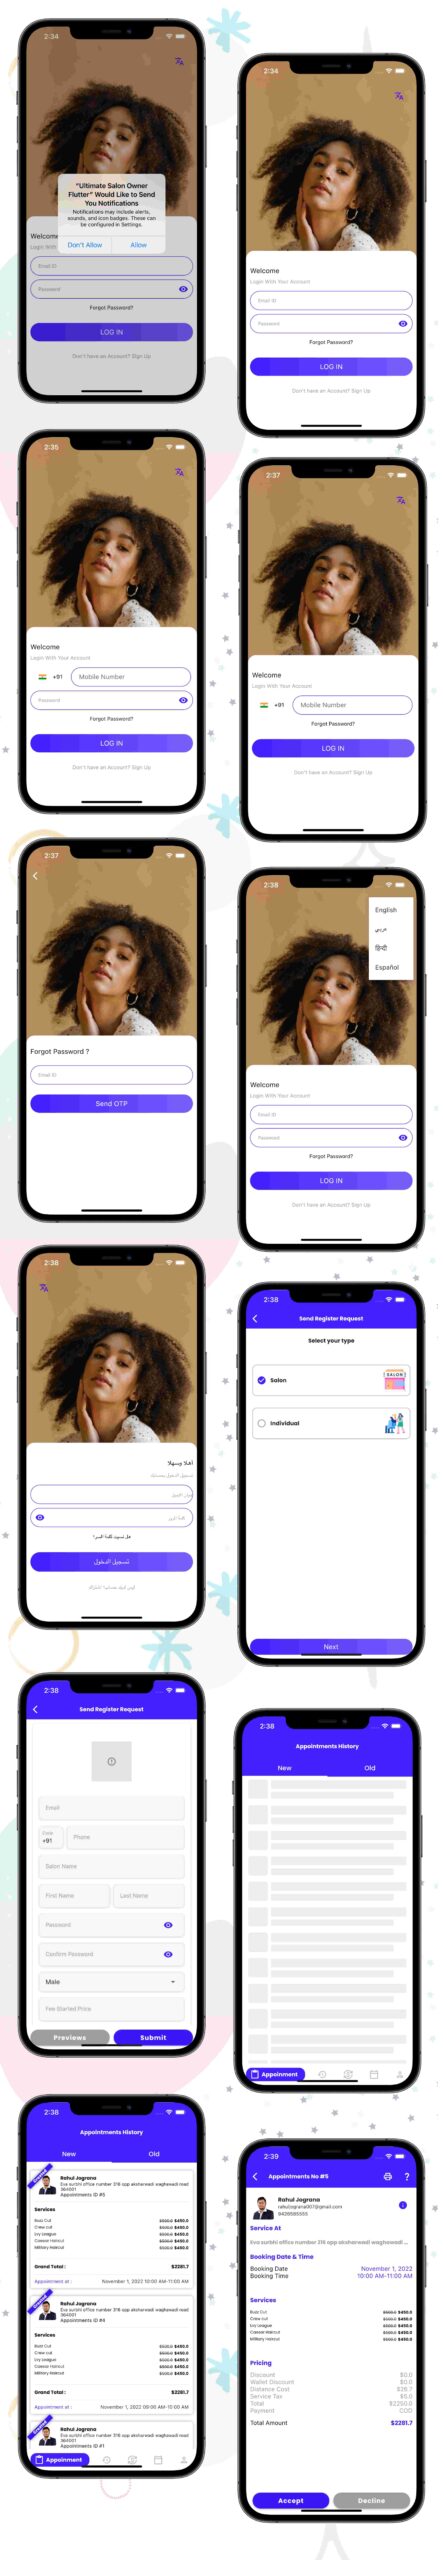 Multi Salon, Individual Appointments Booking System Full App Solution Flutter / Laravel / Angular - 9